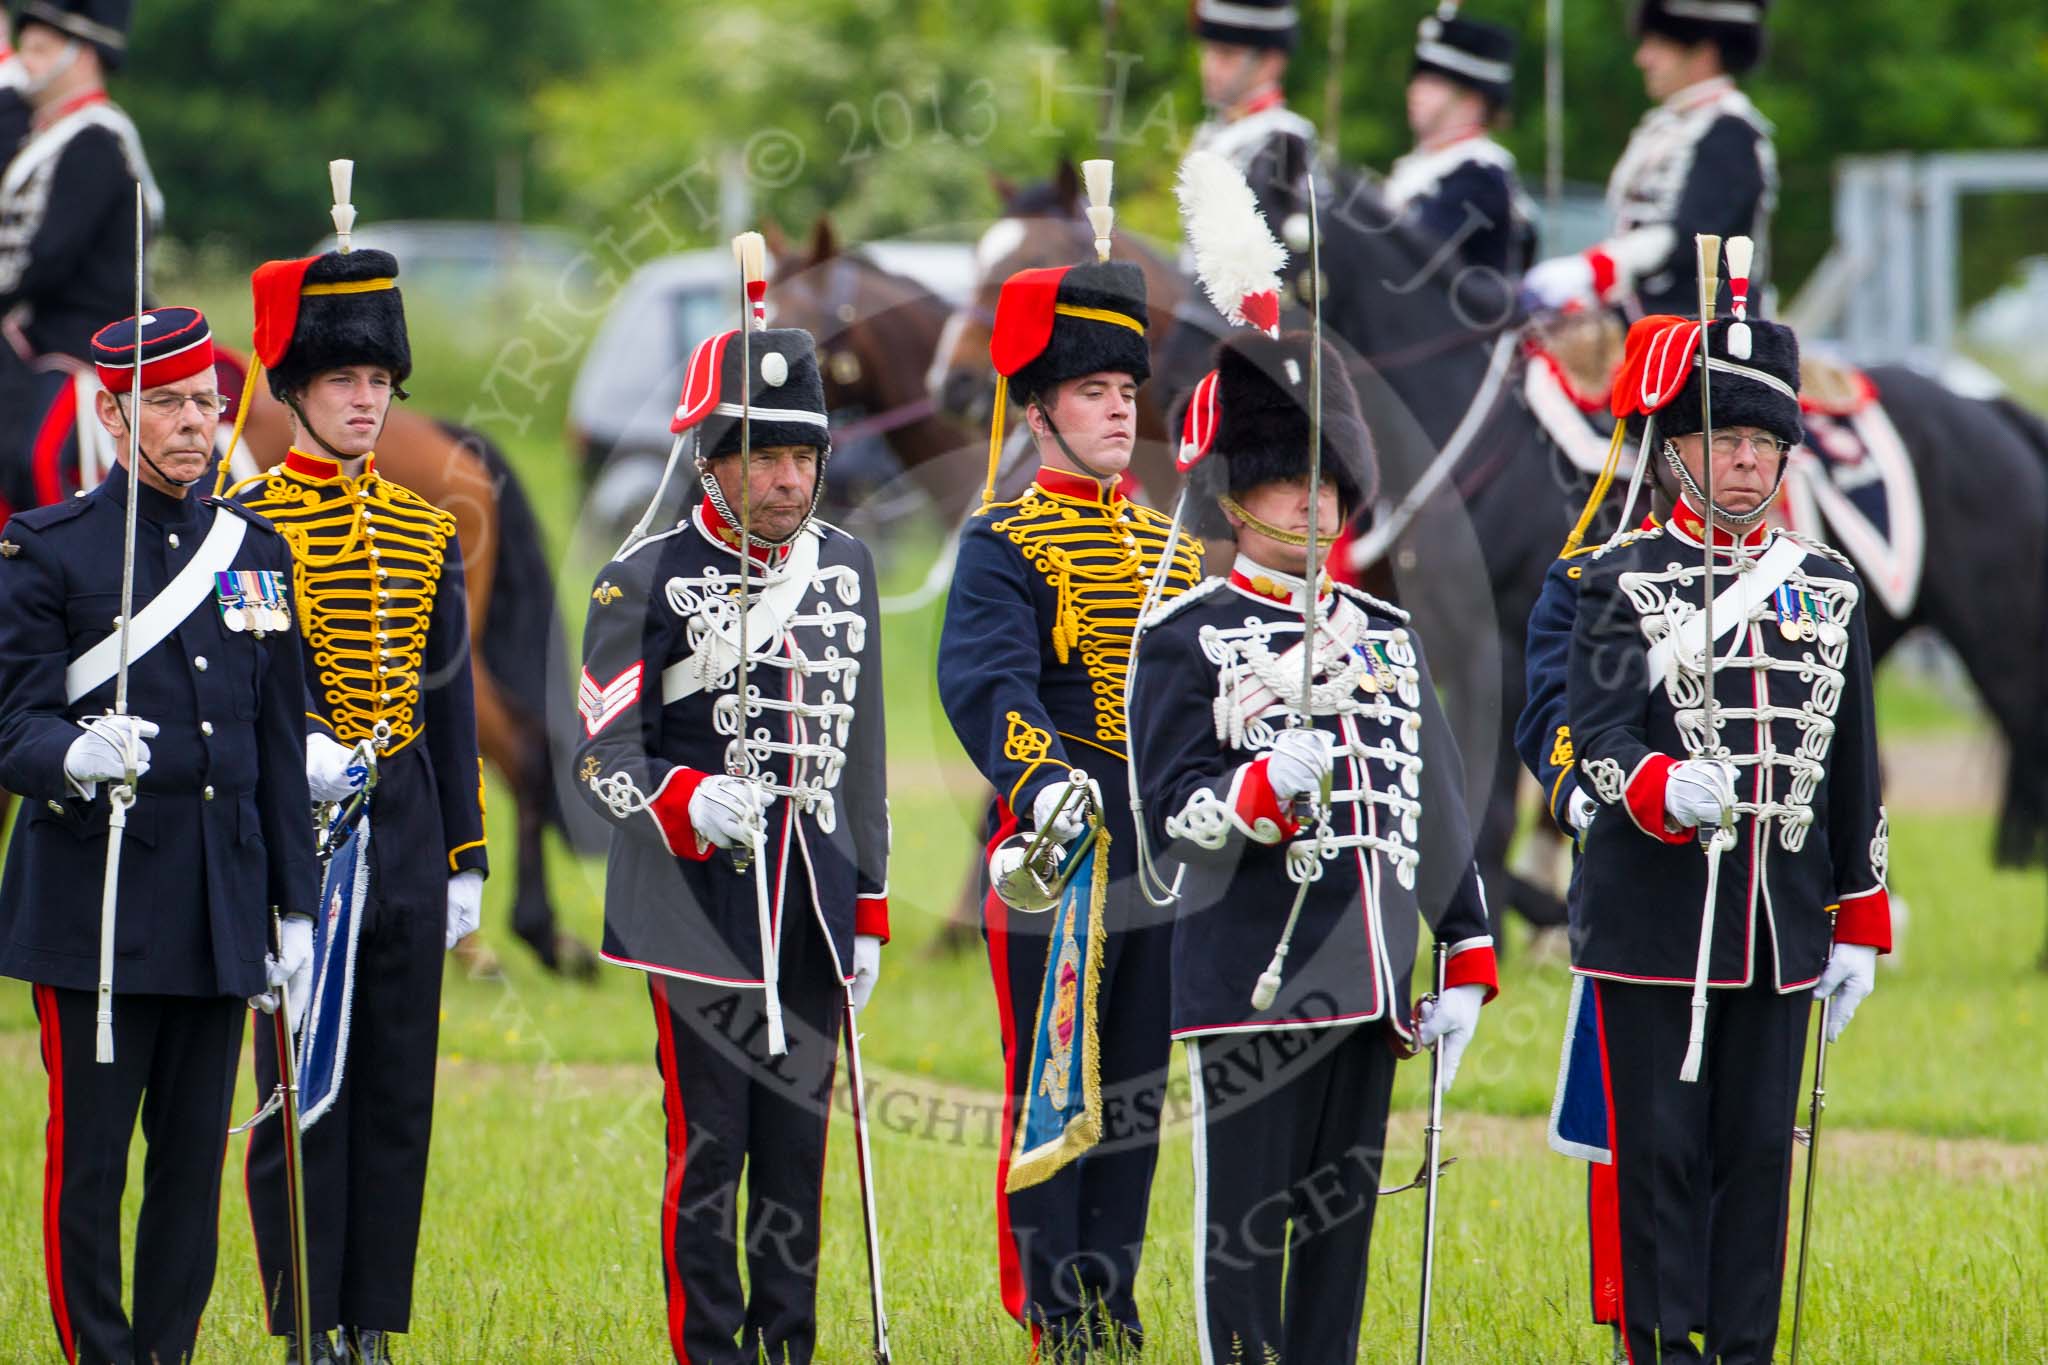 The Light Cavalry HAC Annual Review and Inspection 2013.
Windsor Great Park Review Ground,
Windsor,
Berkshire,
United Kingdom,
on 09 June 2013 at 13:31, image #399